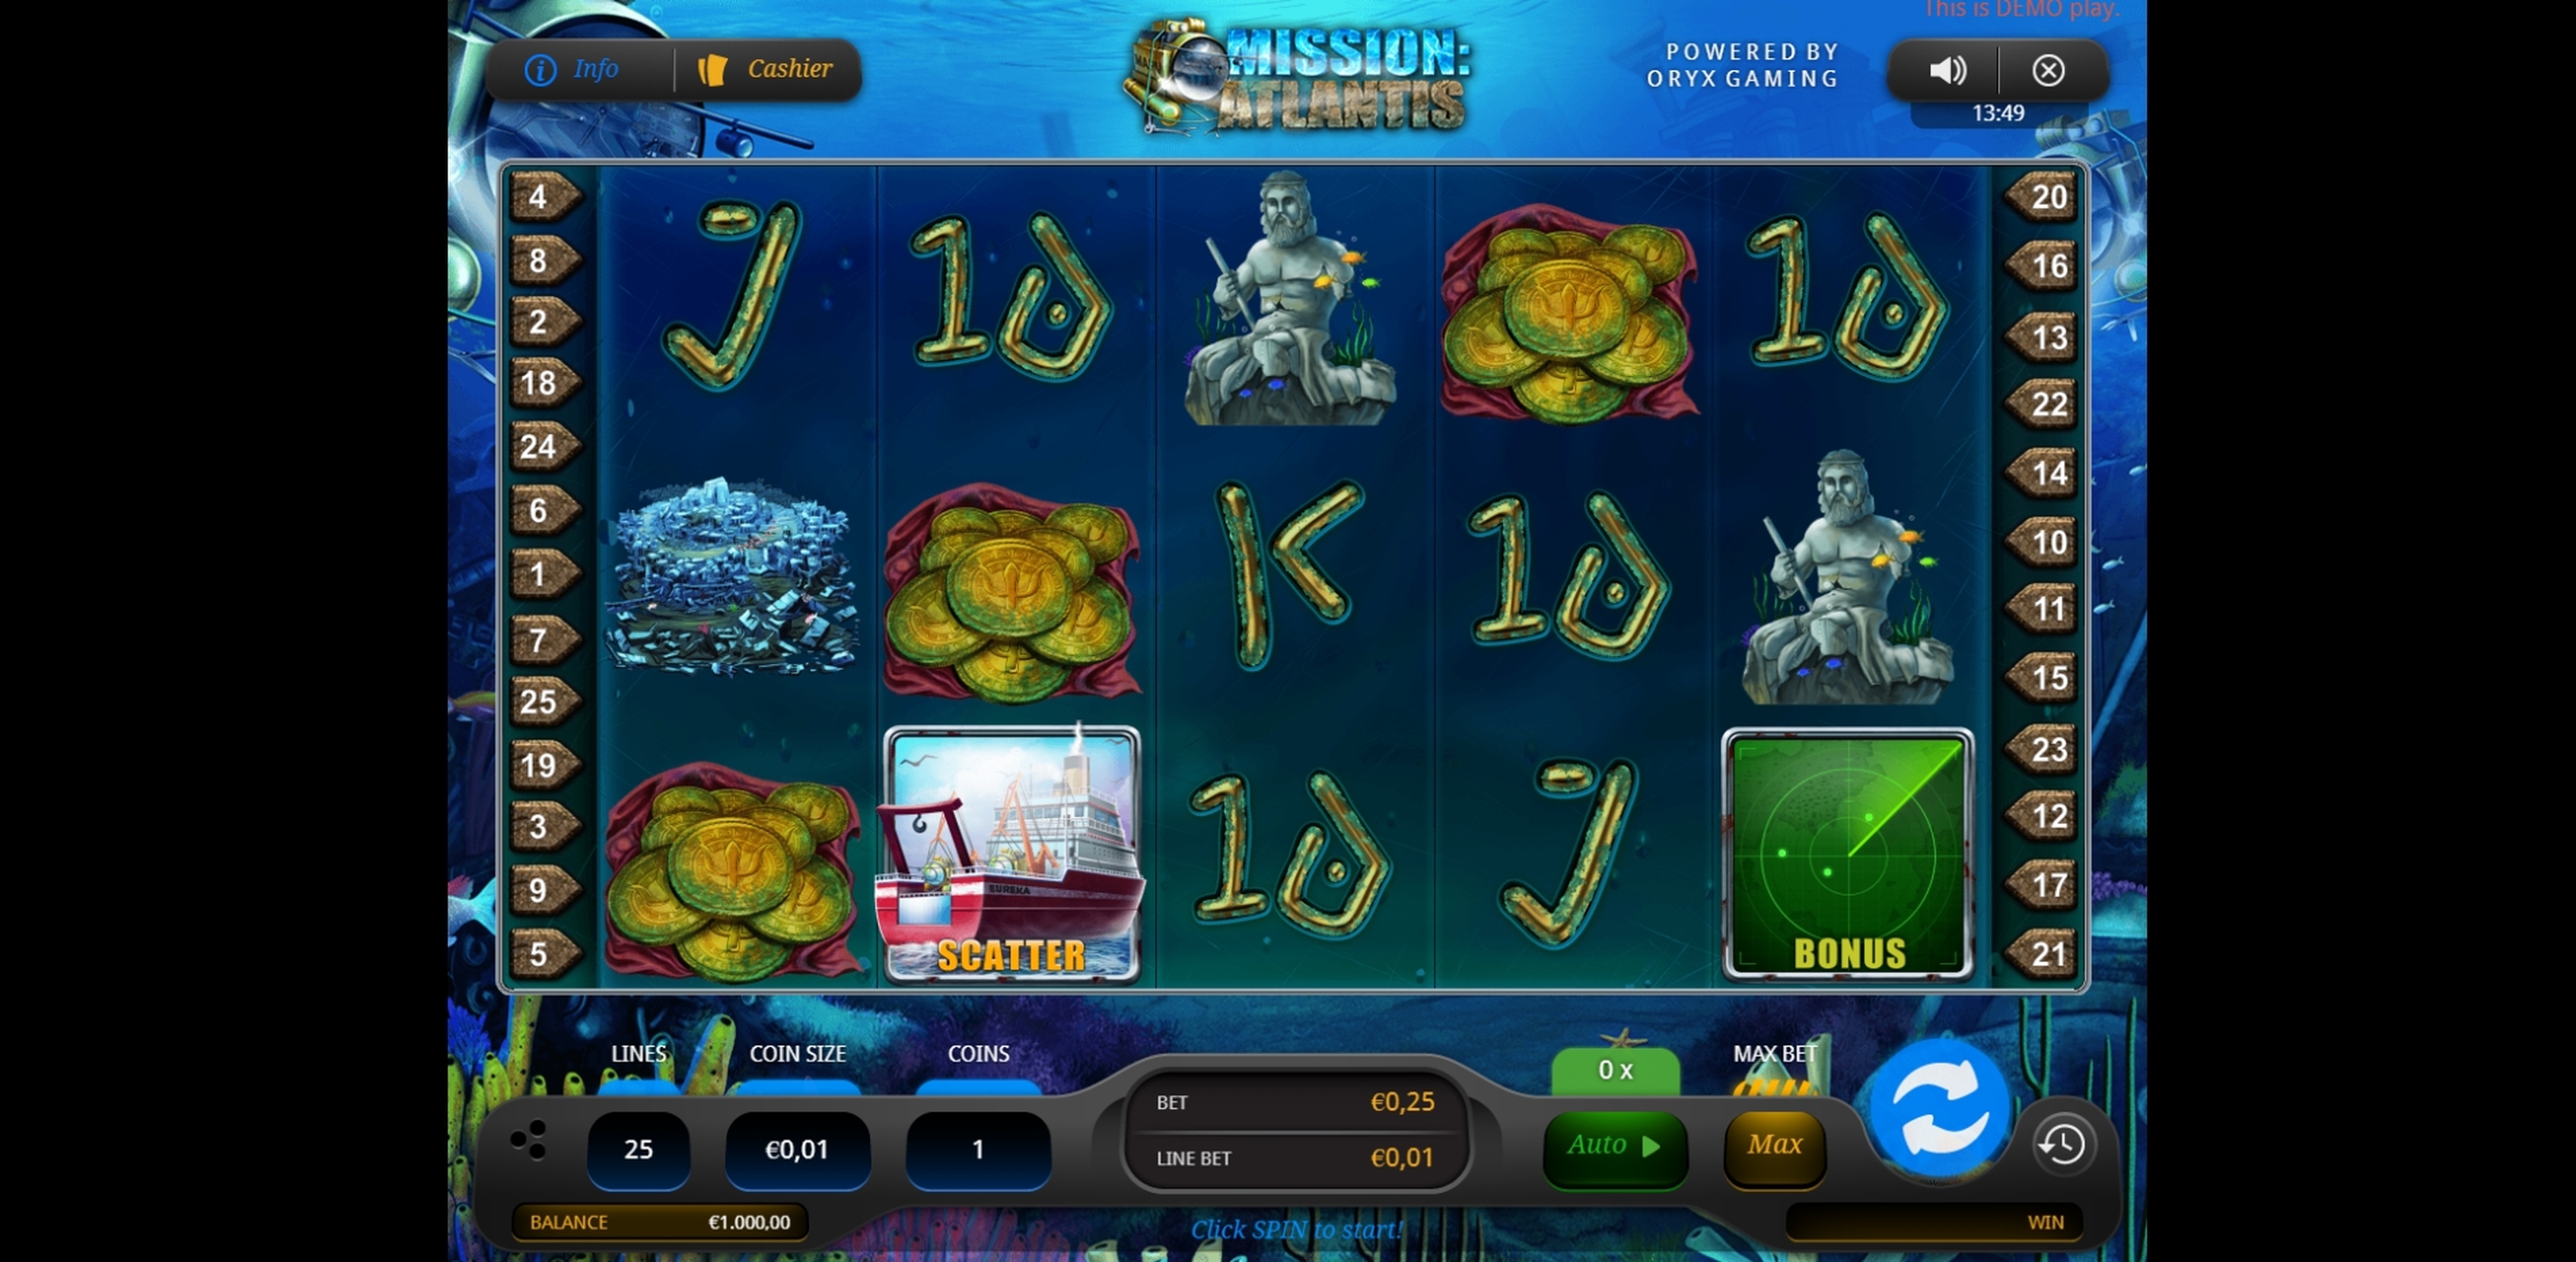 Reels in Mission: Atlantis Slot Game by Oryx Gaming